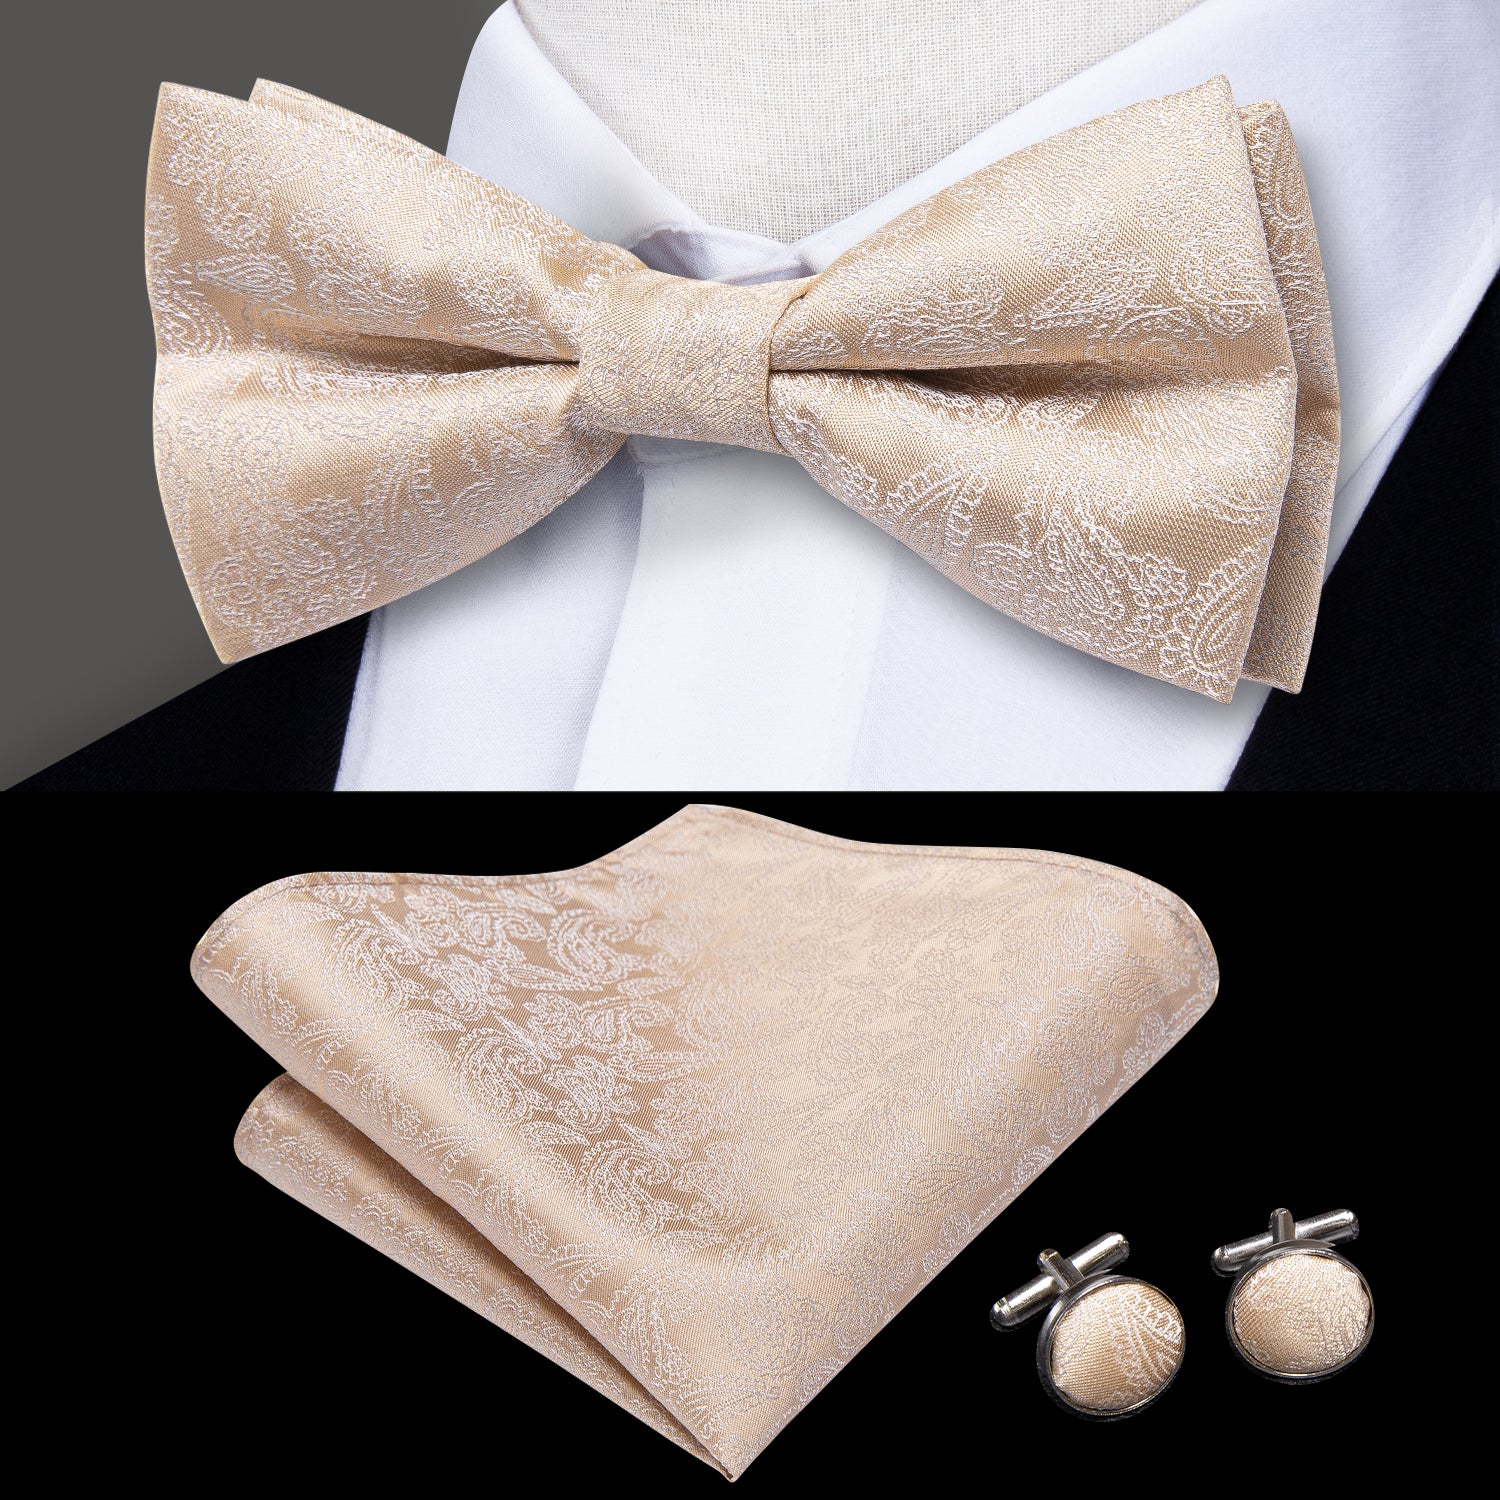 Champagne White Paisley Pre-tied Bow Tie Hanky Cufflinks Set